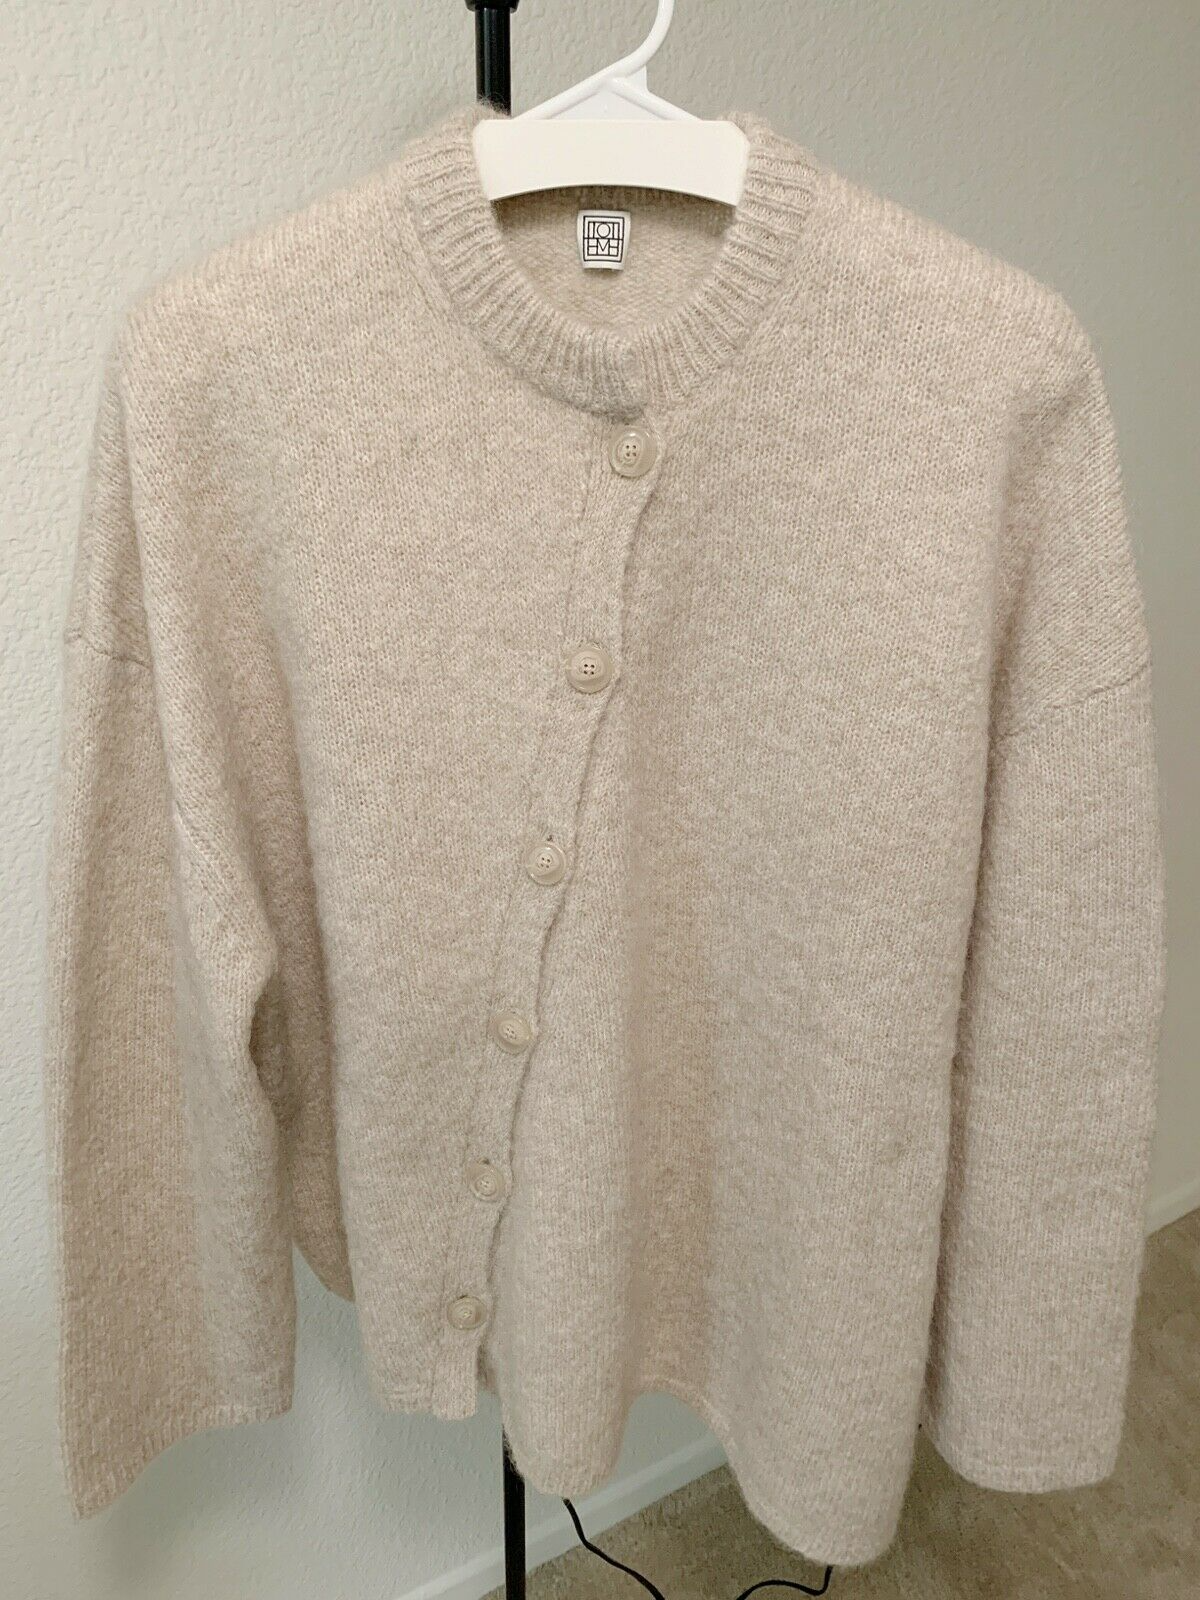 Toteme + Brand New Noma Cardigan Cashmere Mohair Blend Beige Size M